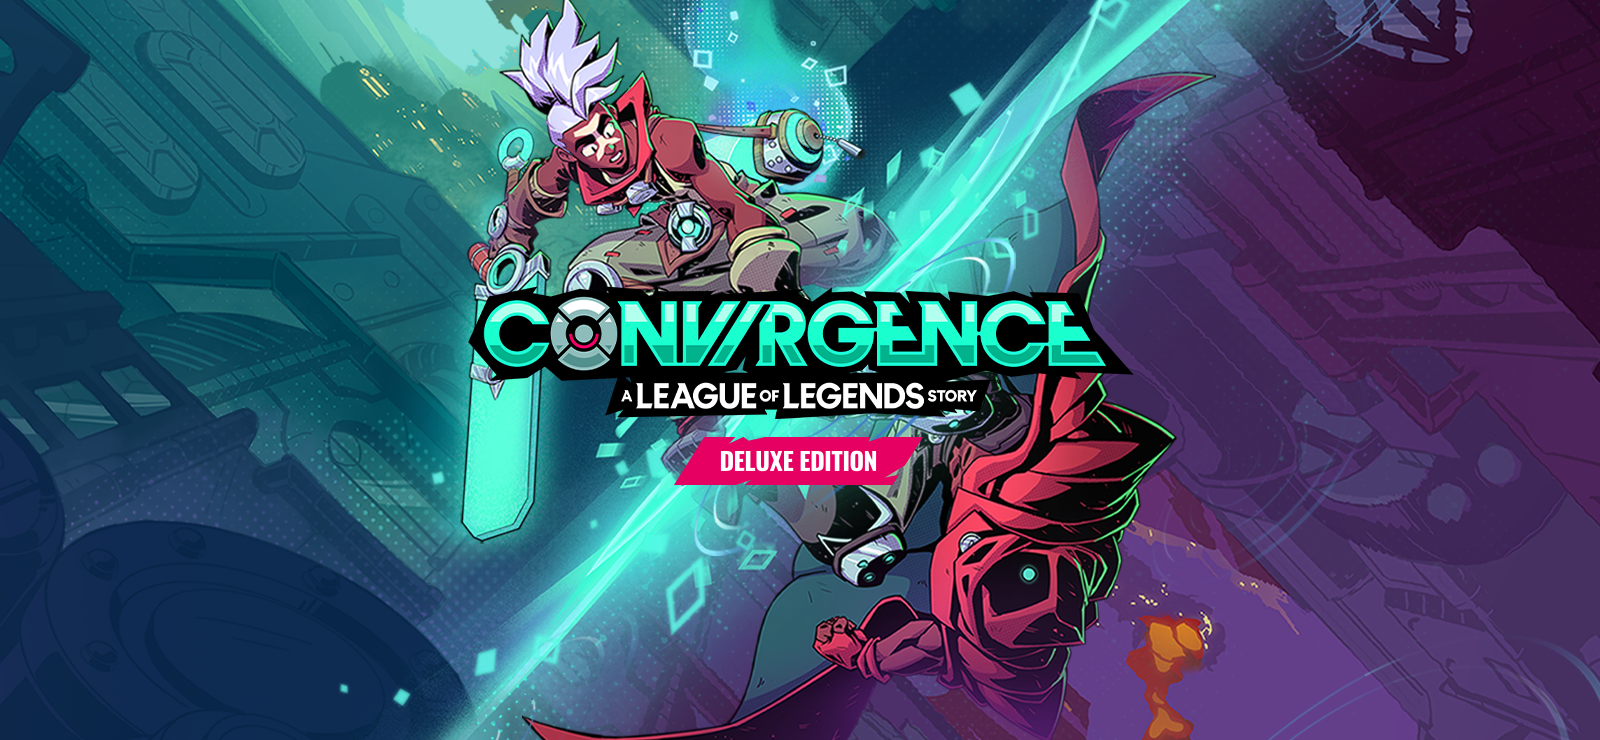 CONVERGENCE: A League Of Legends Story™ Deluxe Edition